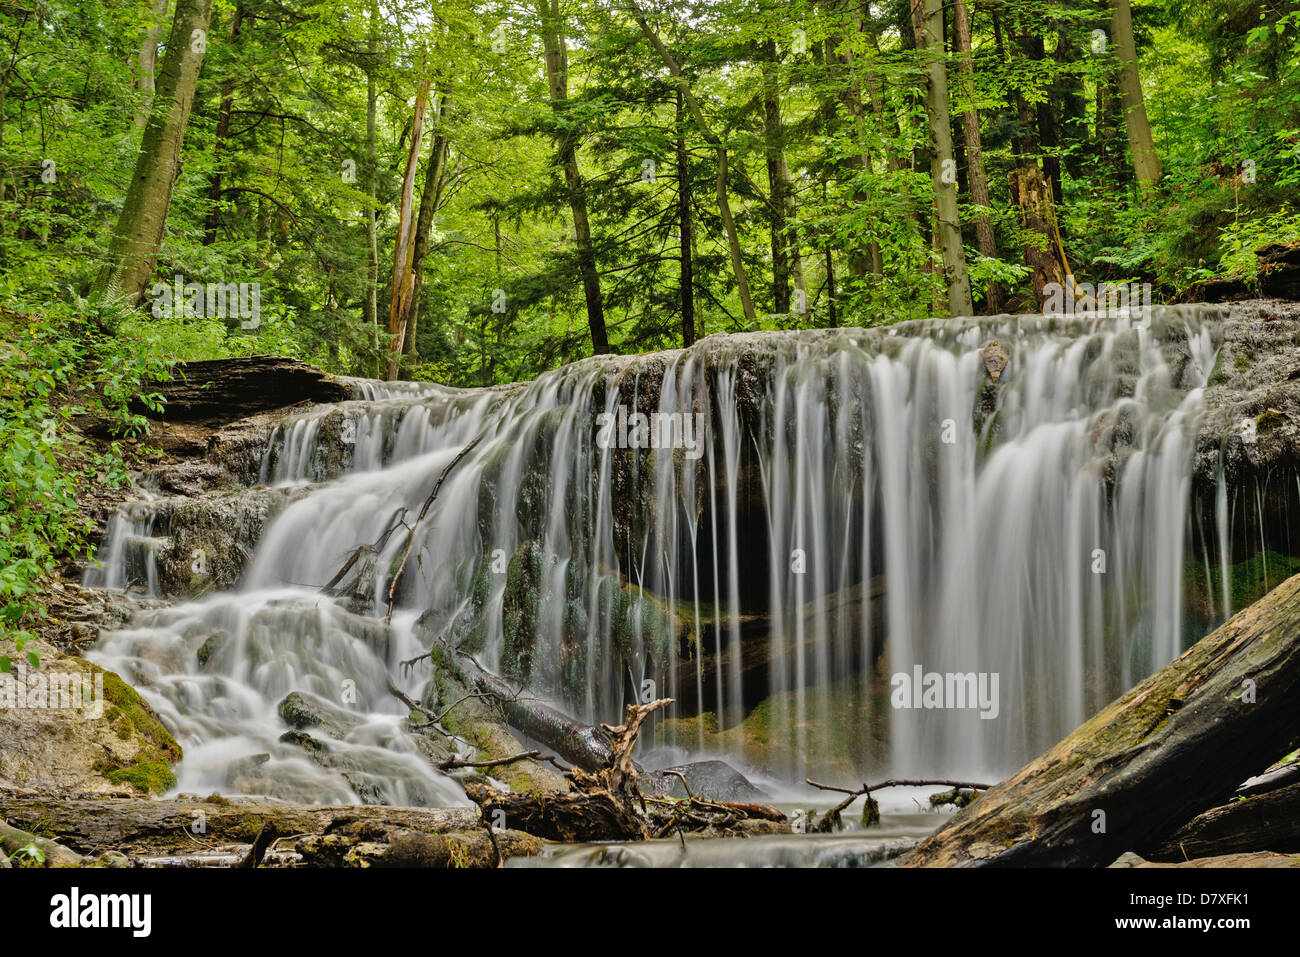 The falls on Weavers creek in Owen Sound, Ontario, Canada Stock Photo